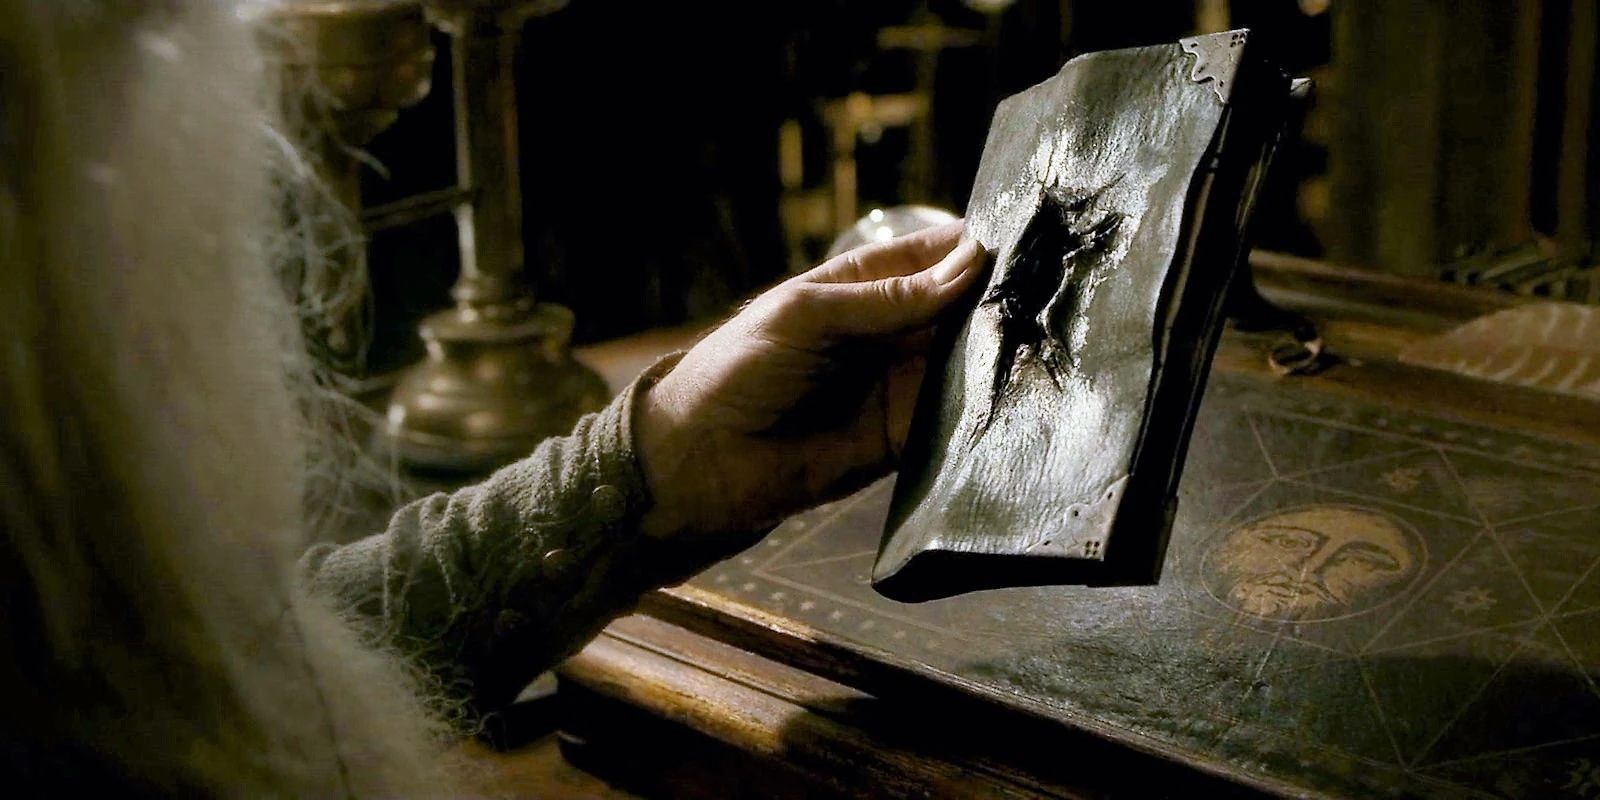 dumbledore holding tom riddle's diary